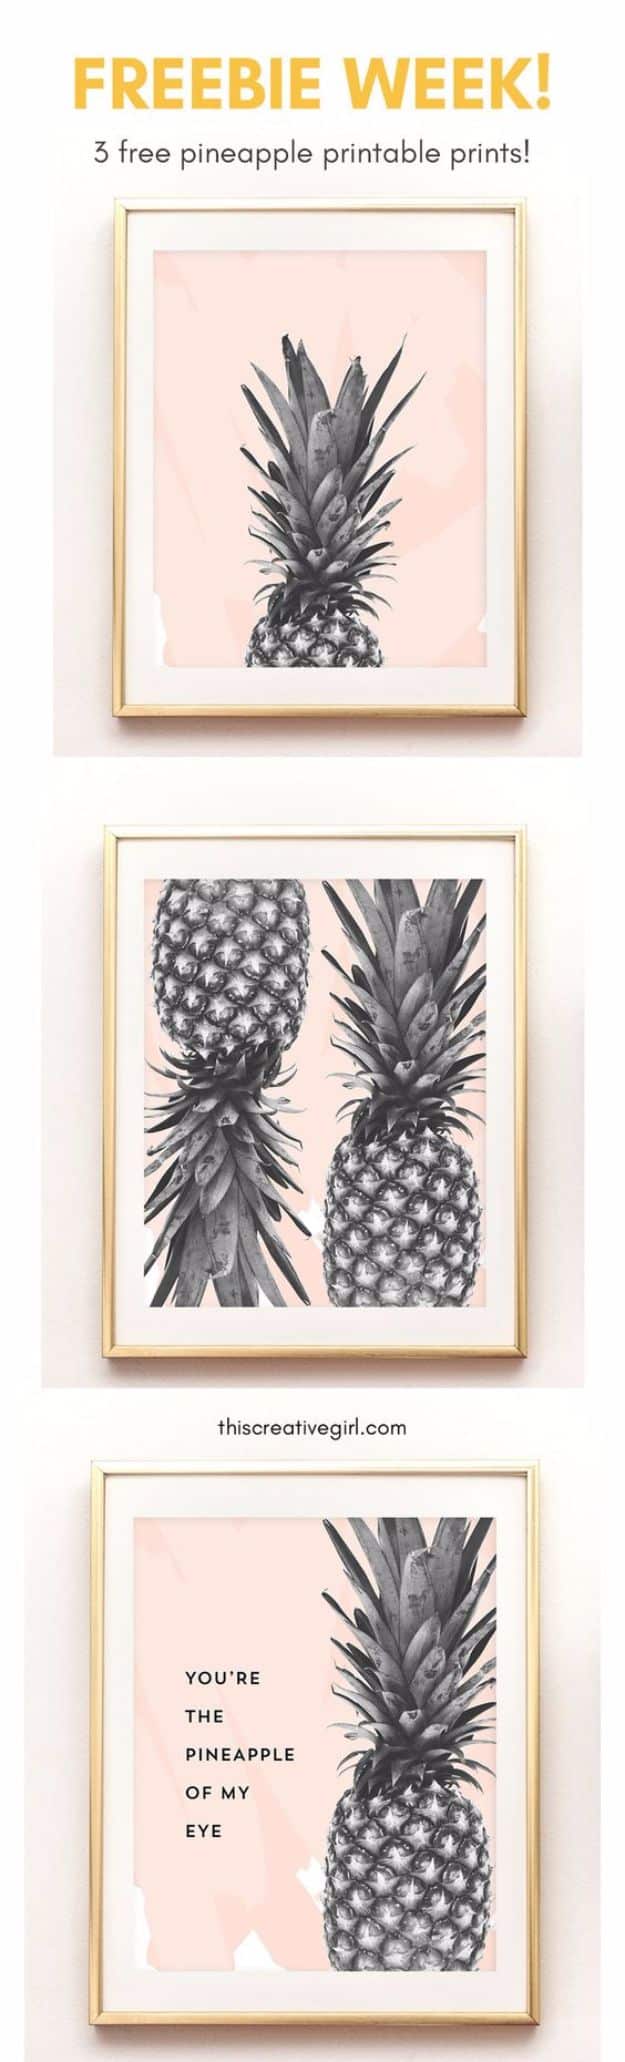 Free Printables For Your Walls - Free Pineapple Printable Art - Best Free Prints for Wall Art and Picture to Print for Home and Bedroom Decor - Ideas for the Home, Organization - Quotes for Bedroom and Kitchens, Vintage Bathroom Pictures - Downloadable Printable for Kids - DIY and Crafts by DIY JOY 